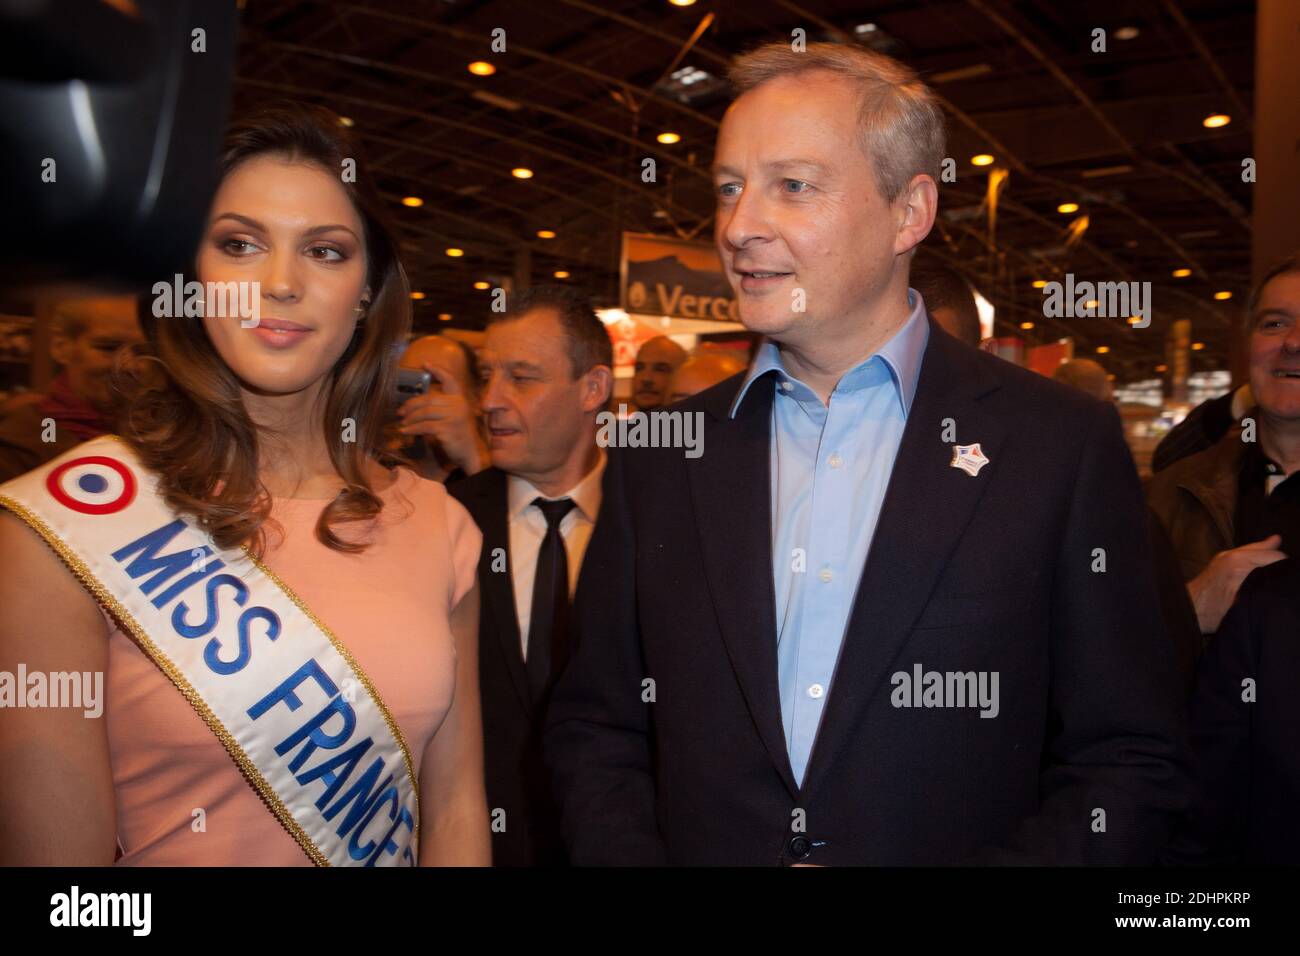 Les Republicains (LR) right-wing party deputy of Eure and former Agriculture Minister Bruno Le Maire meets with Miss France 2016 Iris Mittenaere as he tours the 53rd annual Paris International Agricultural Show at Porte de Versailles in Paris, France on February 29, 2016. Photo by Audrey Poree/ABACAPRESS.COM Stock Photo